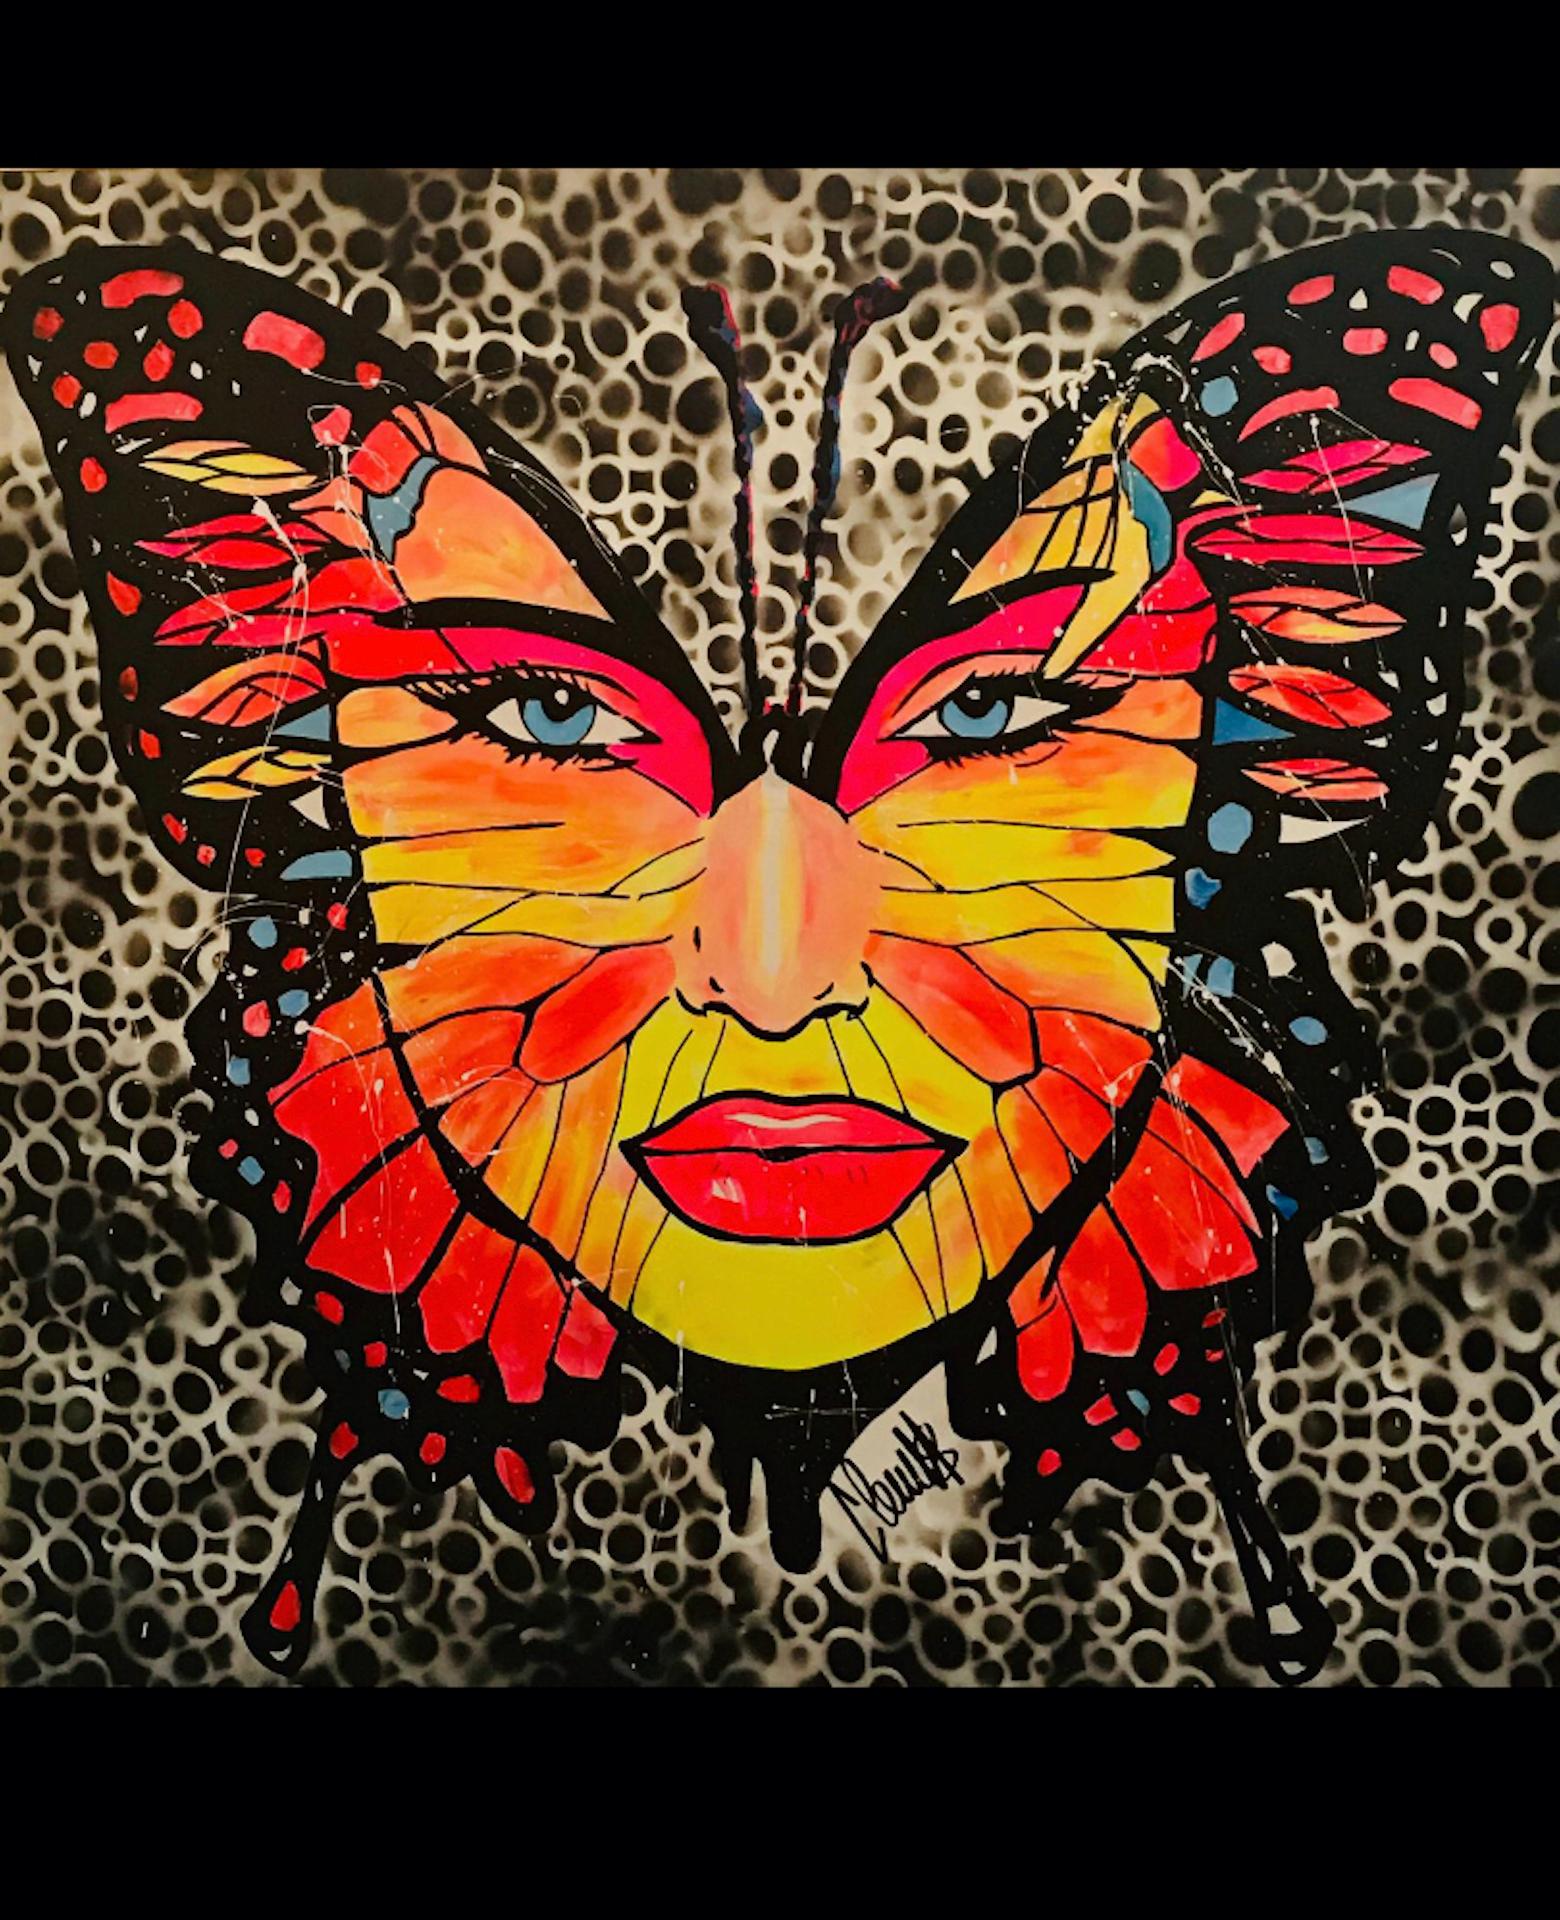 Clem$ 
Butterfly Woman - 2019
Acrylic painting on canvas frame
120 x 120 cms
Signed with certificat.
6000 euros